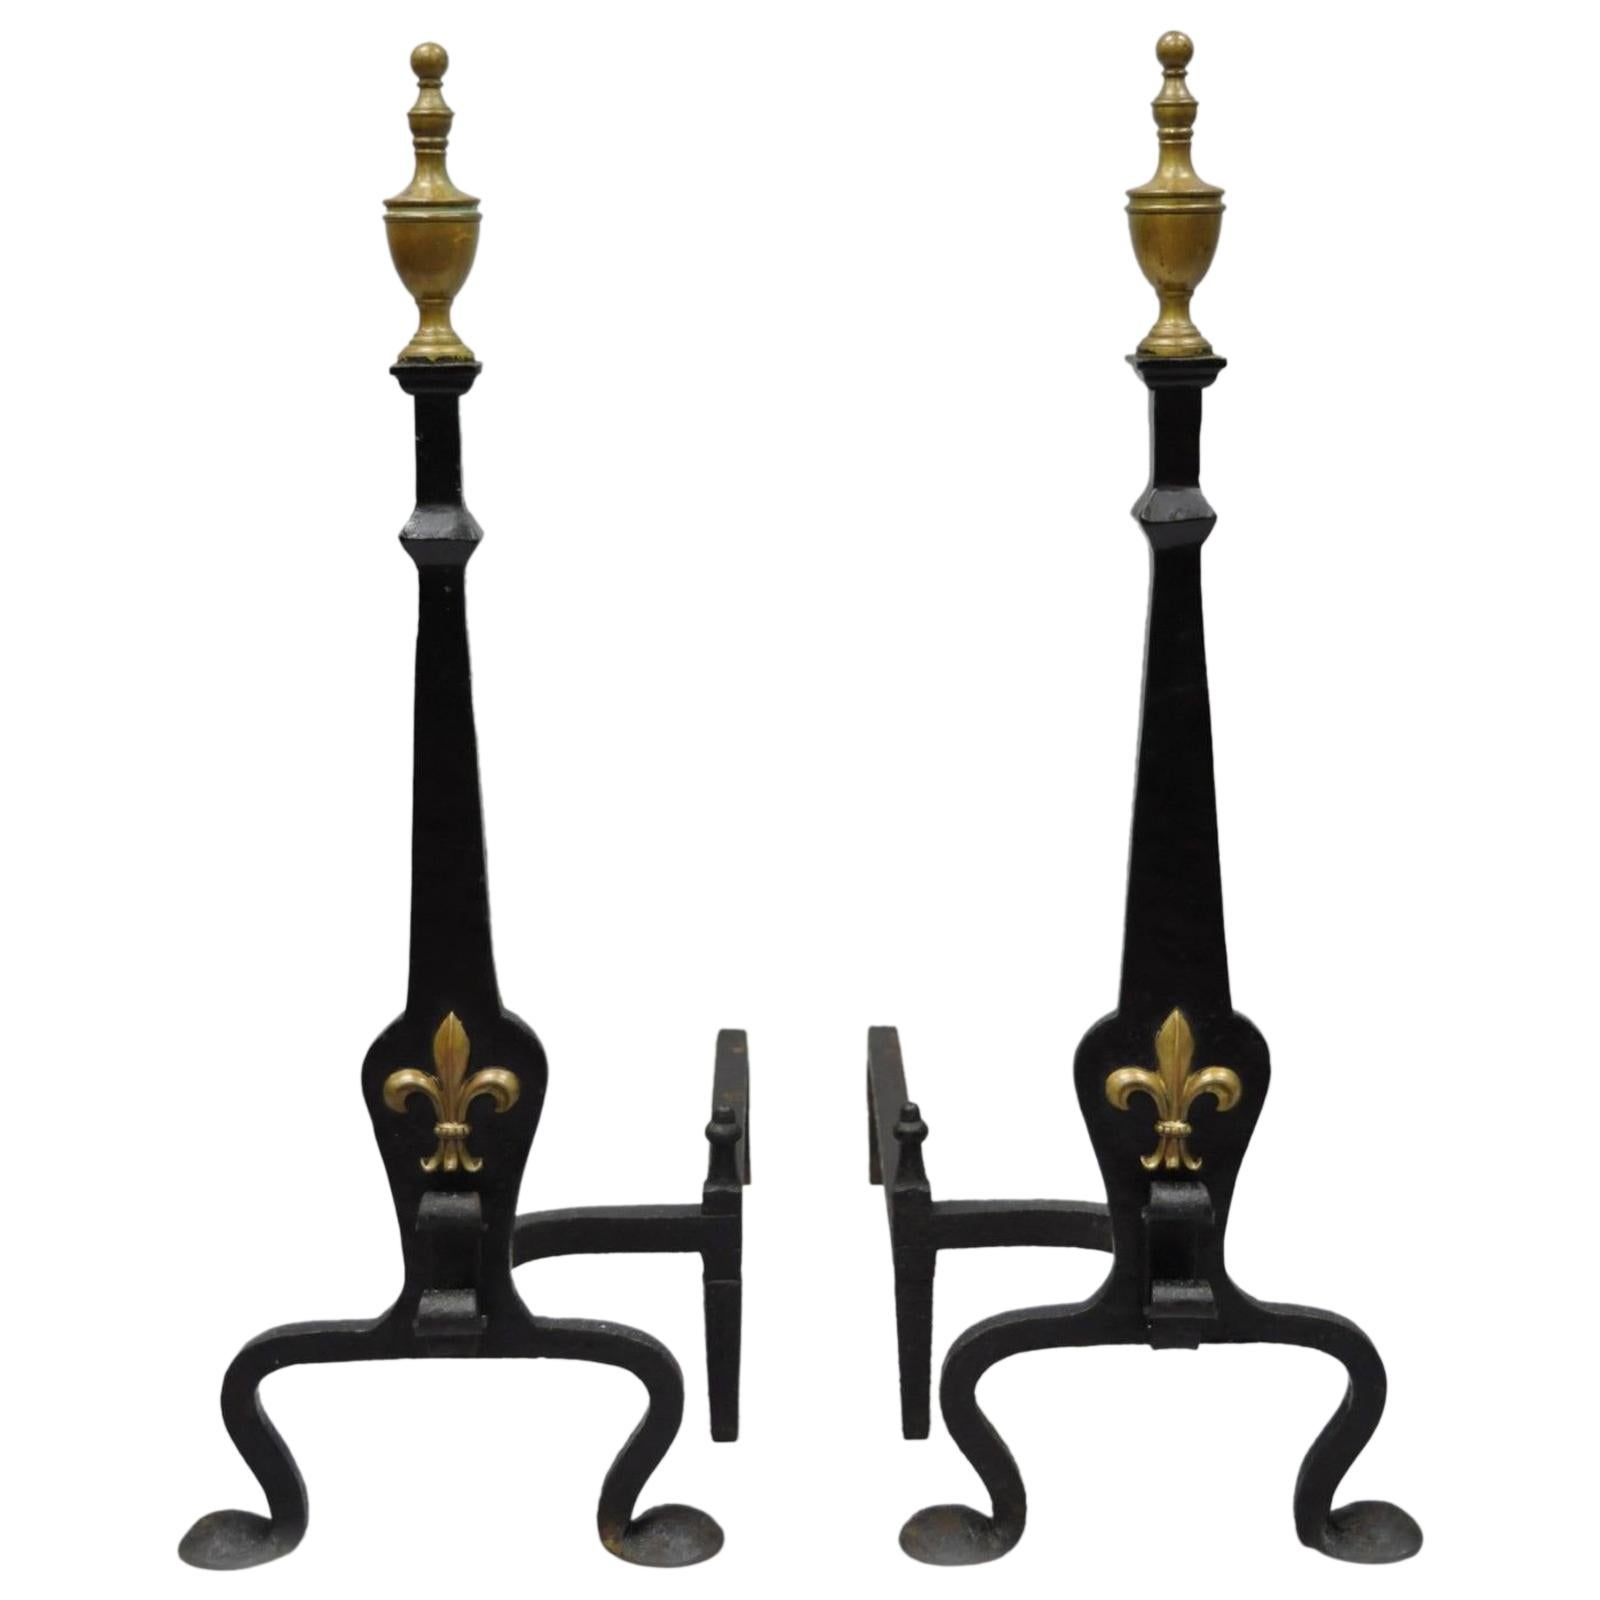 Wrought and Forged Iron Brass Urn Finial Gothic Revival Fireplace Andirons, Pair